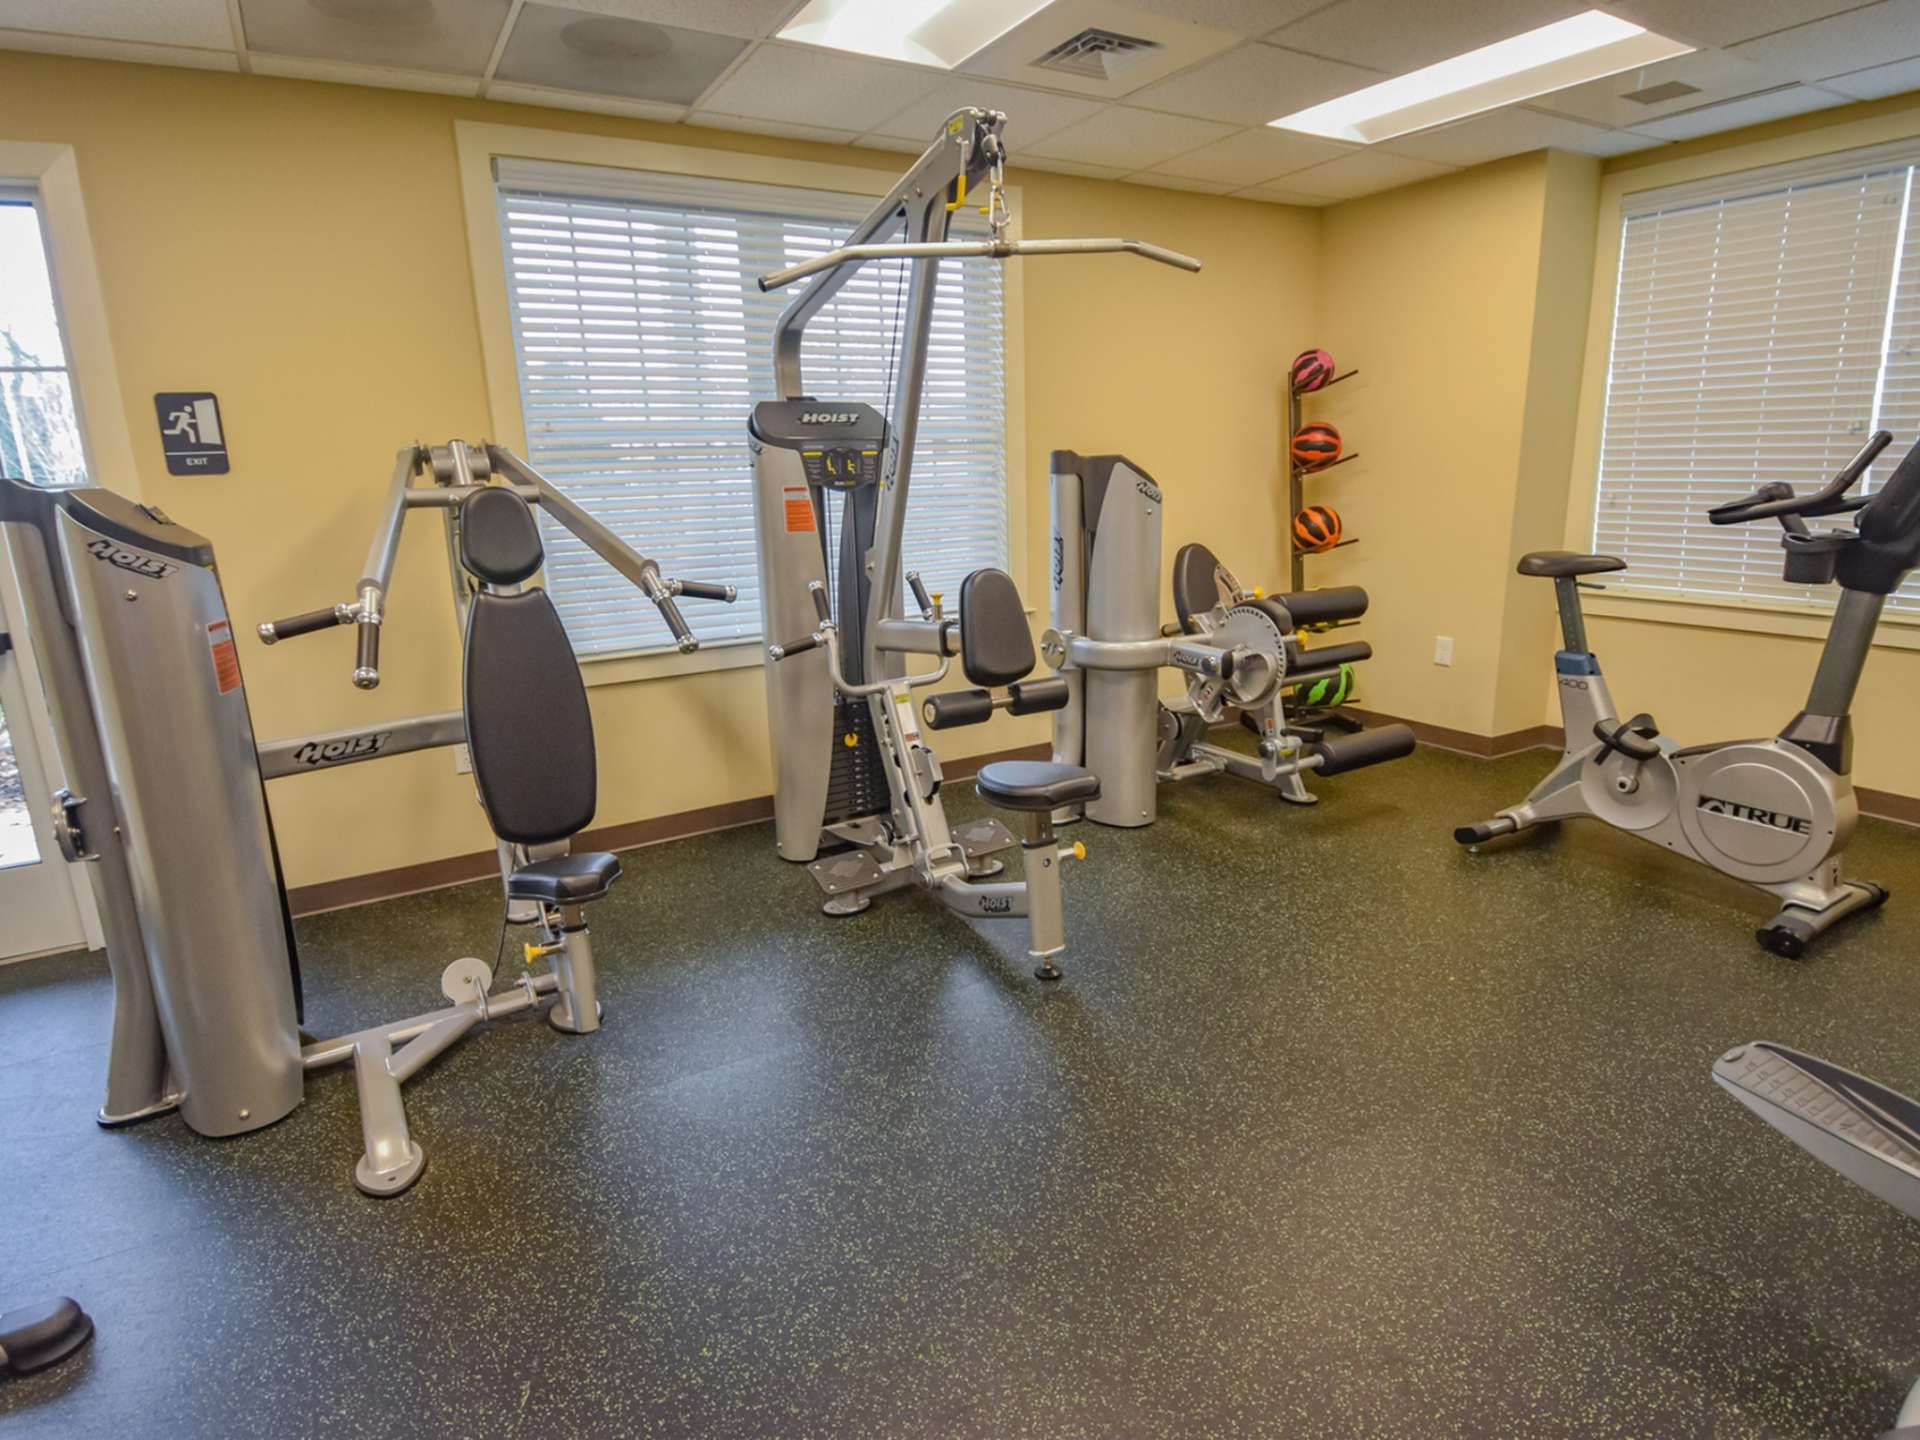 Indoor gym with a variety of workout equipments and two large windows at Lake Club Apartments.